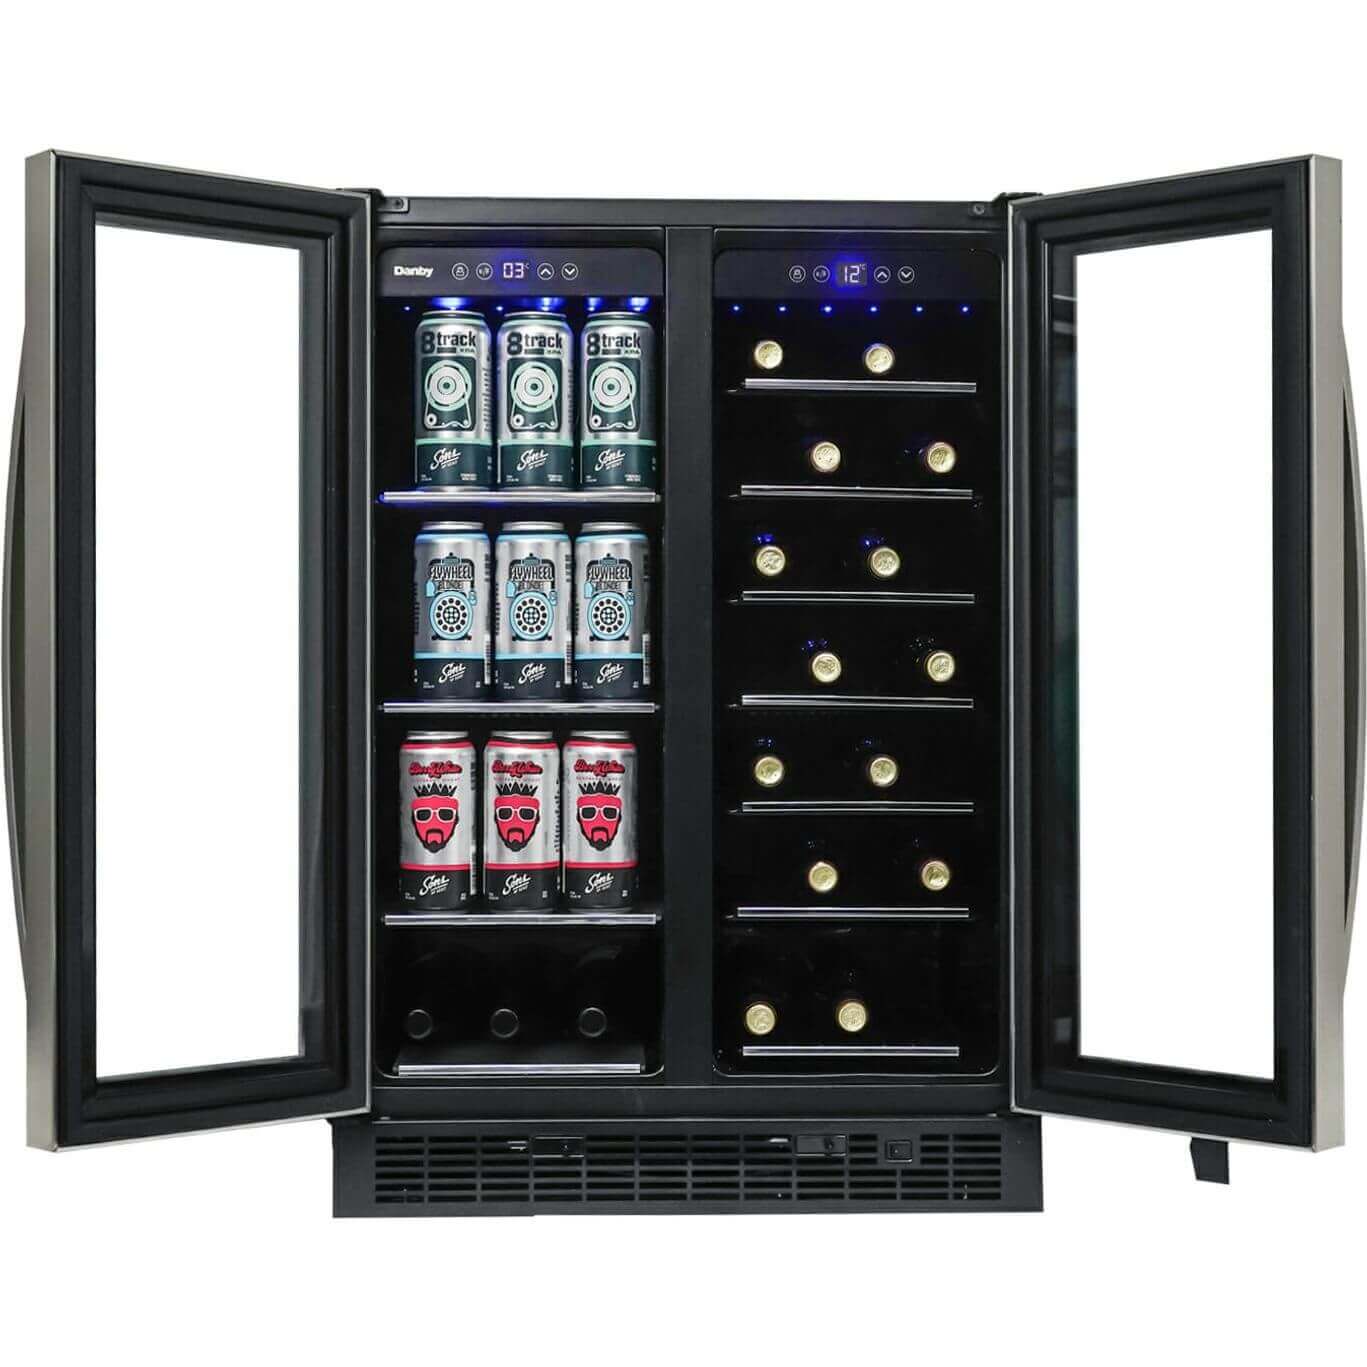 Danby 5.2 cu. ft. Built-in Beverage Center in Stainless Steel